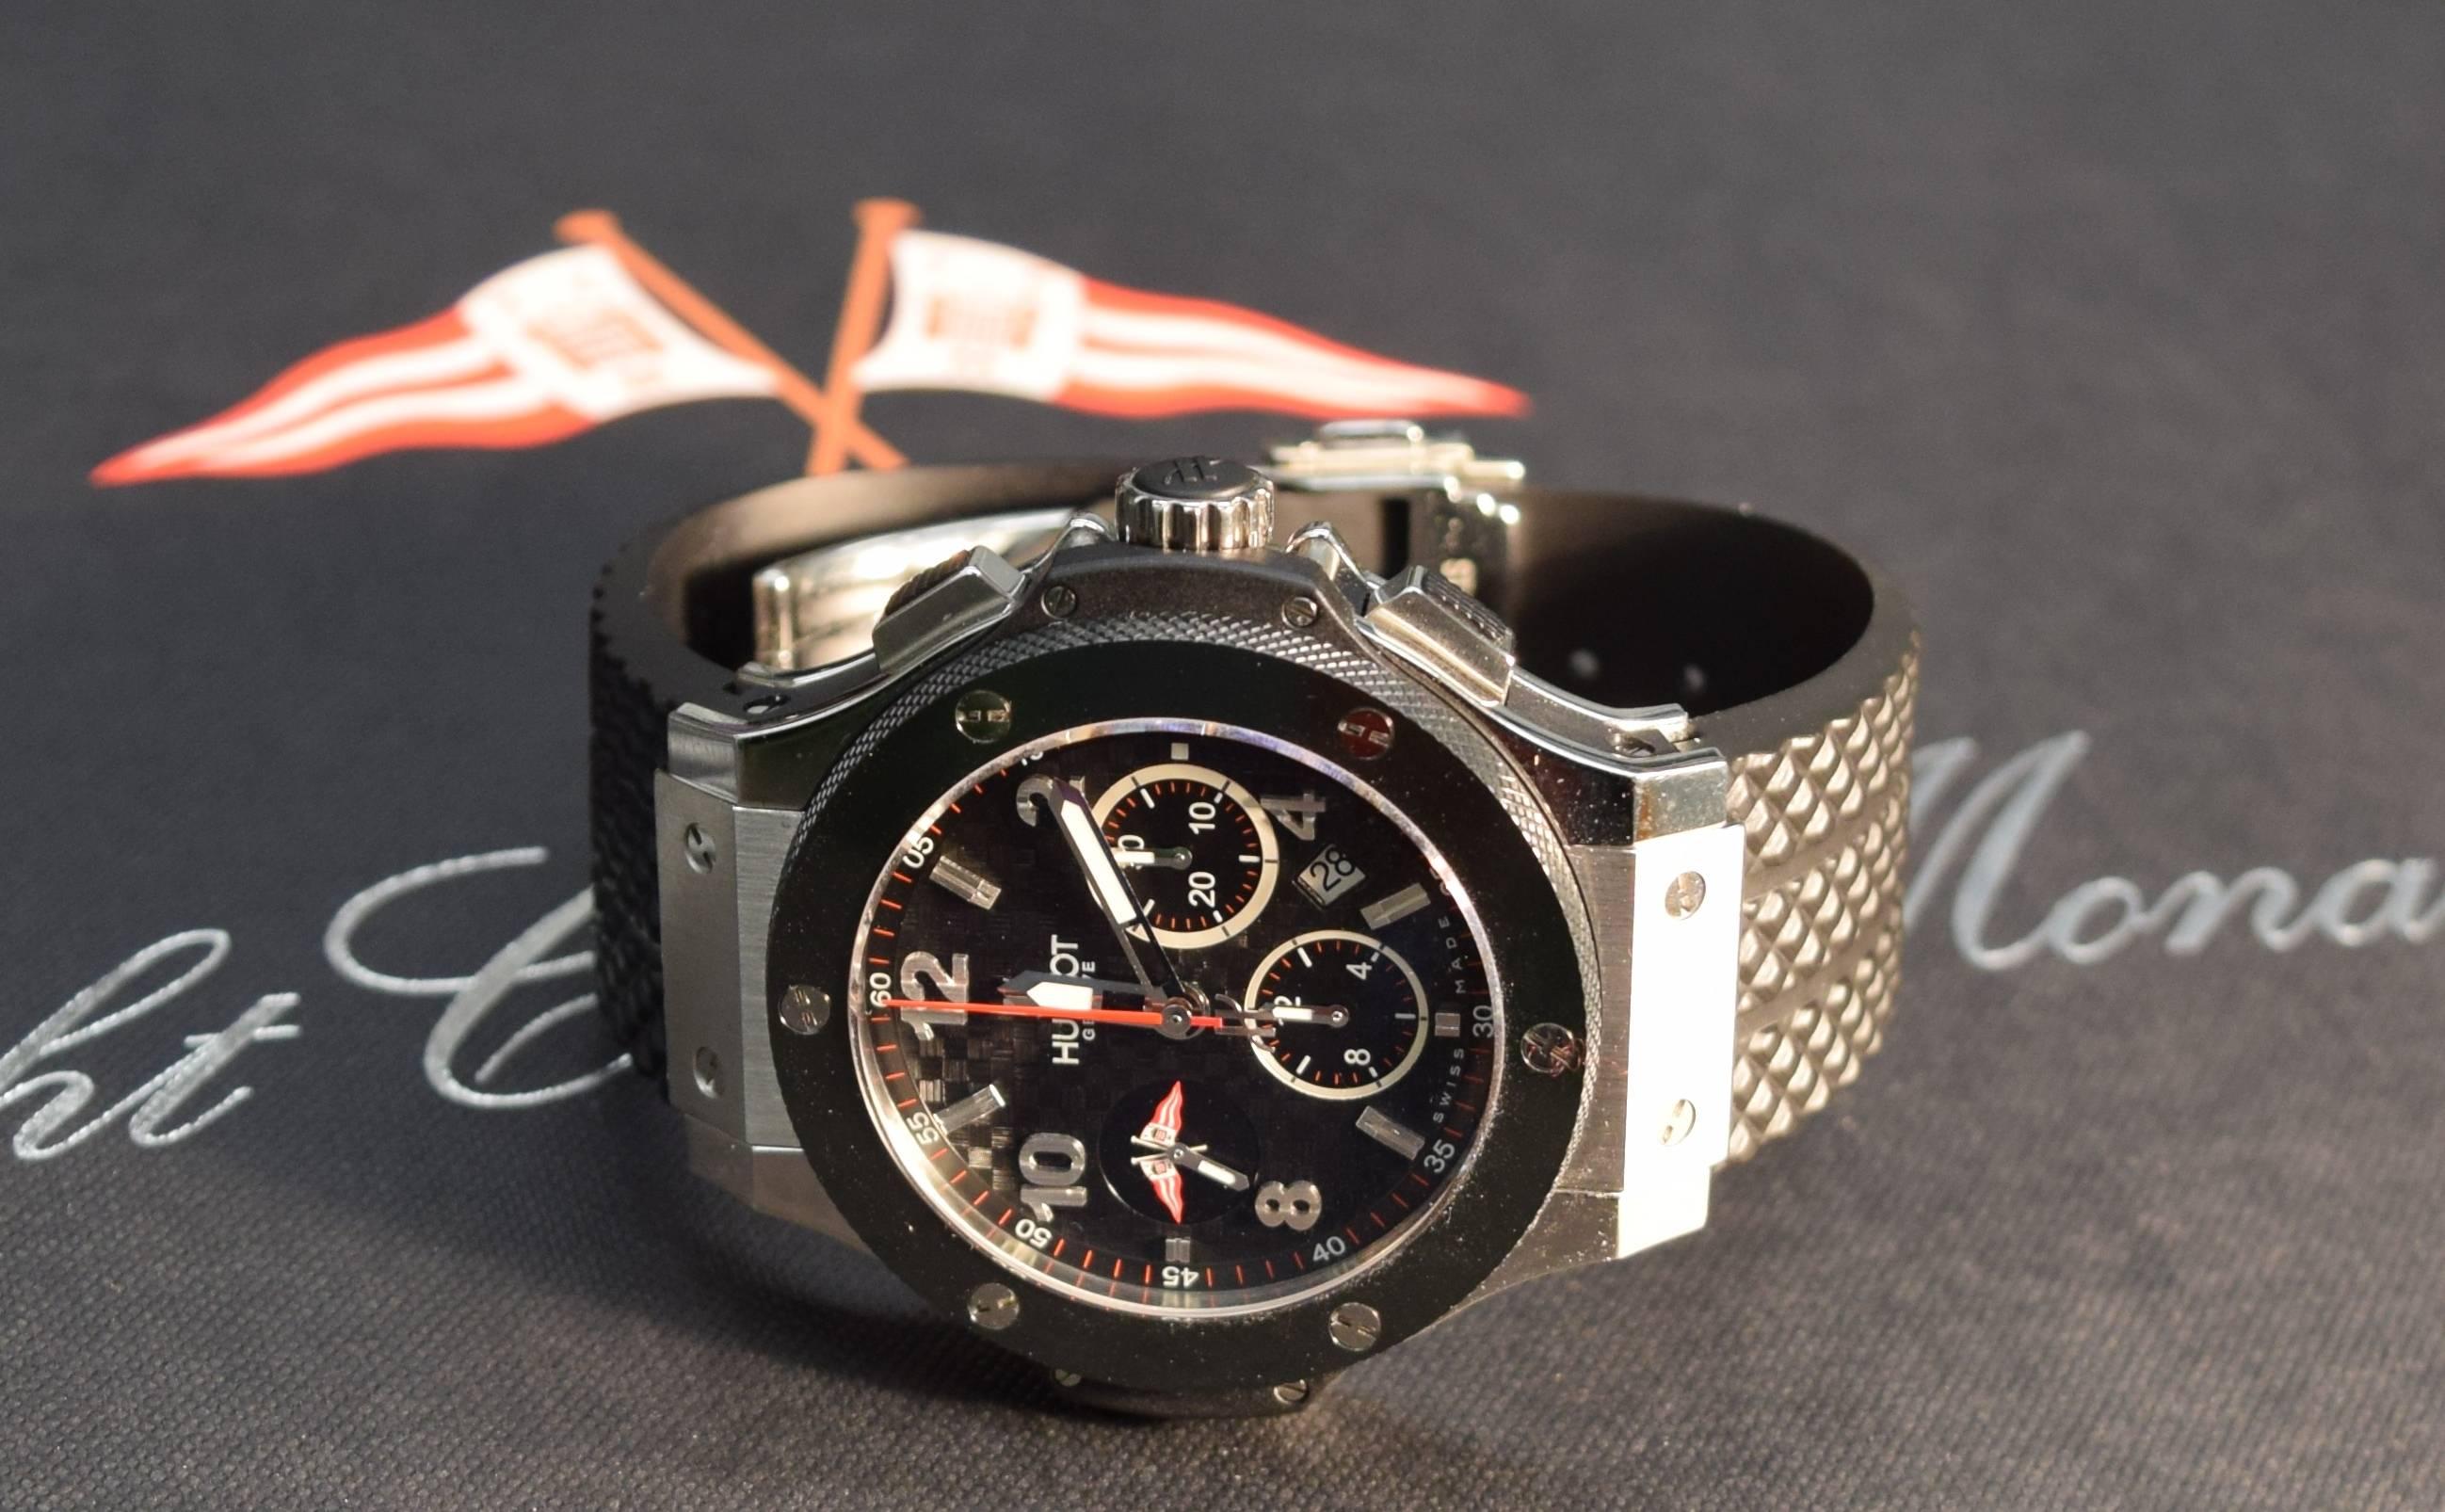 
HUBLOT BIG BANG YACHT CLUB DE MONACO TUIGA LIMITED EDITION 250 PCS

The Hublot Big Bang “Monaco Yacht Club” chronograph, inspired by Tuiga, is produced in a limited and numbered edition of 250 units. Its black carbon face displays the red, white